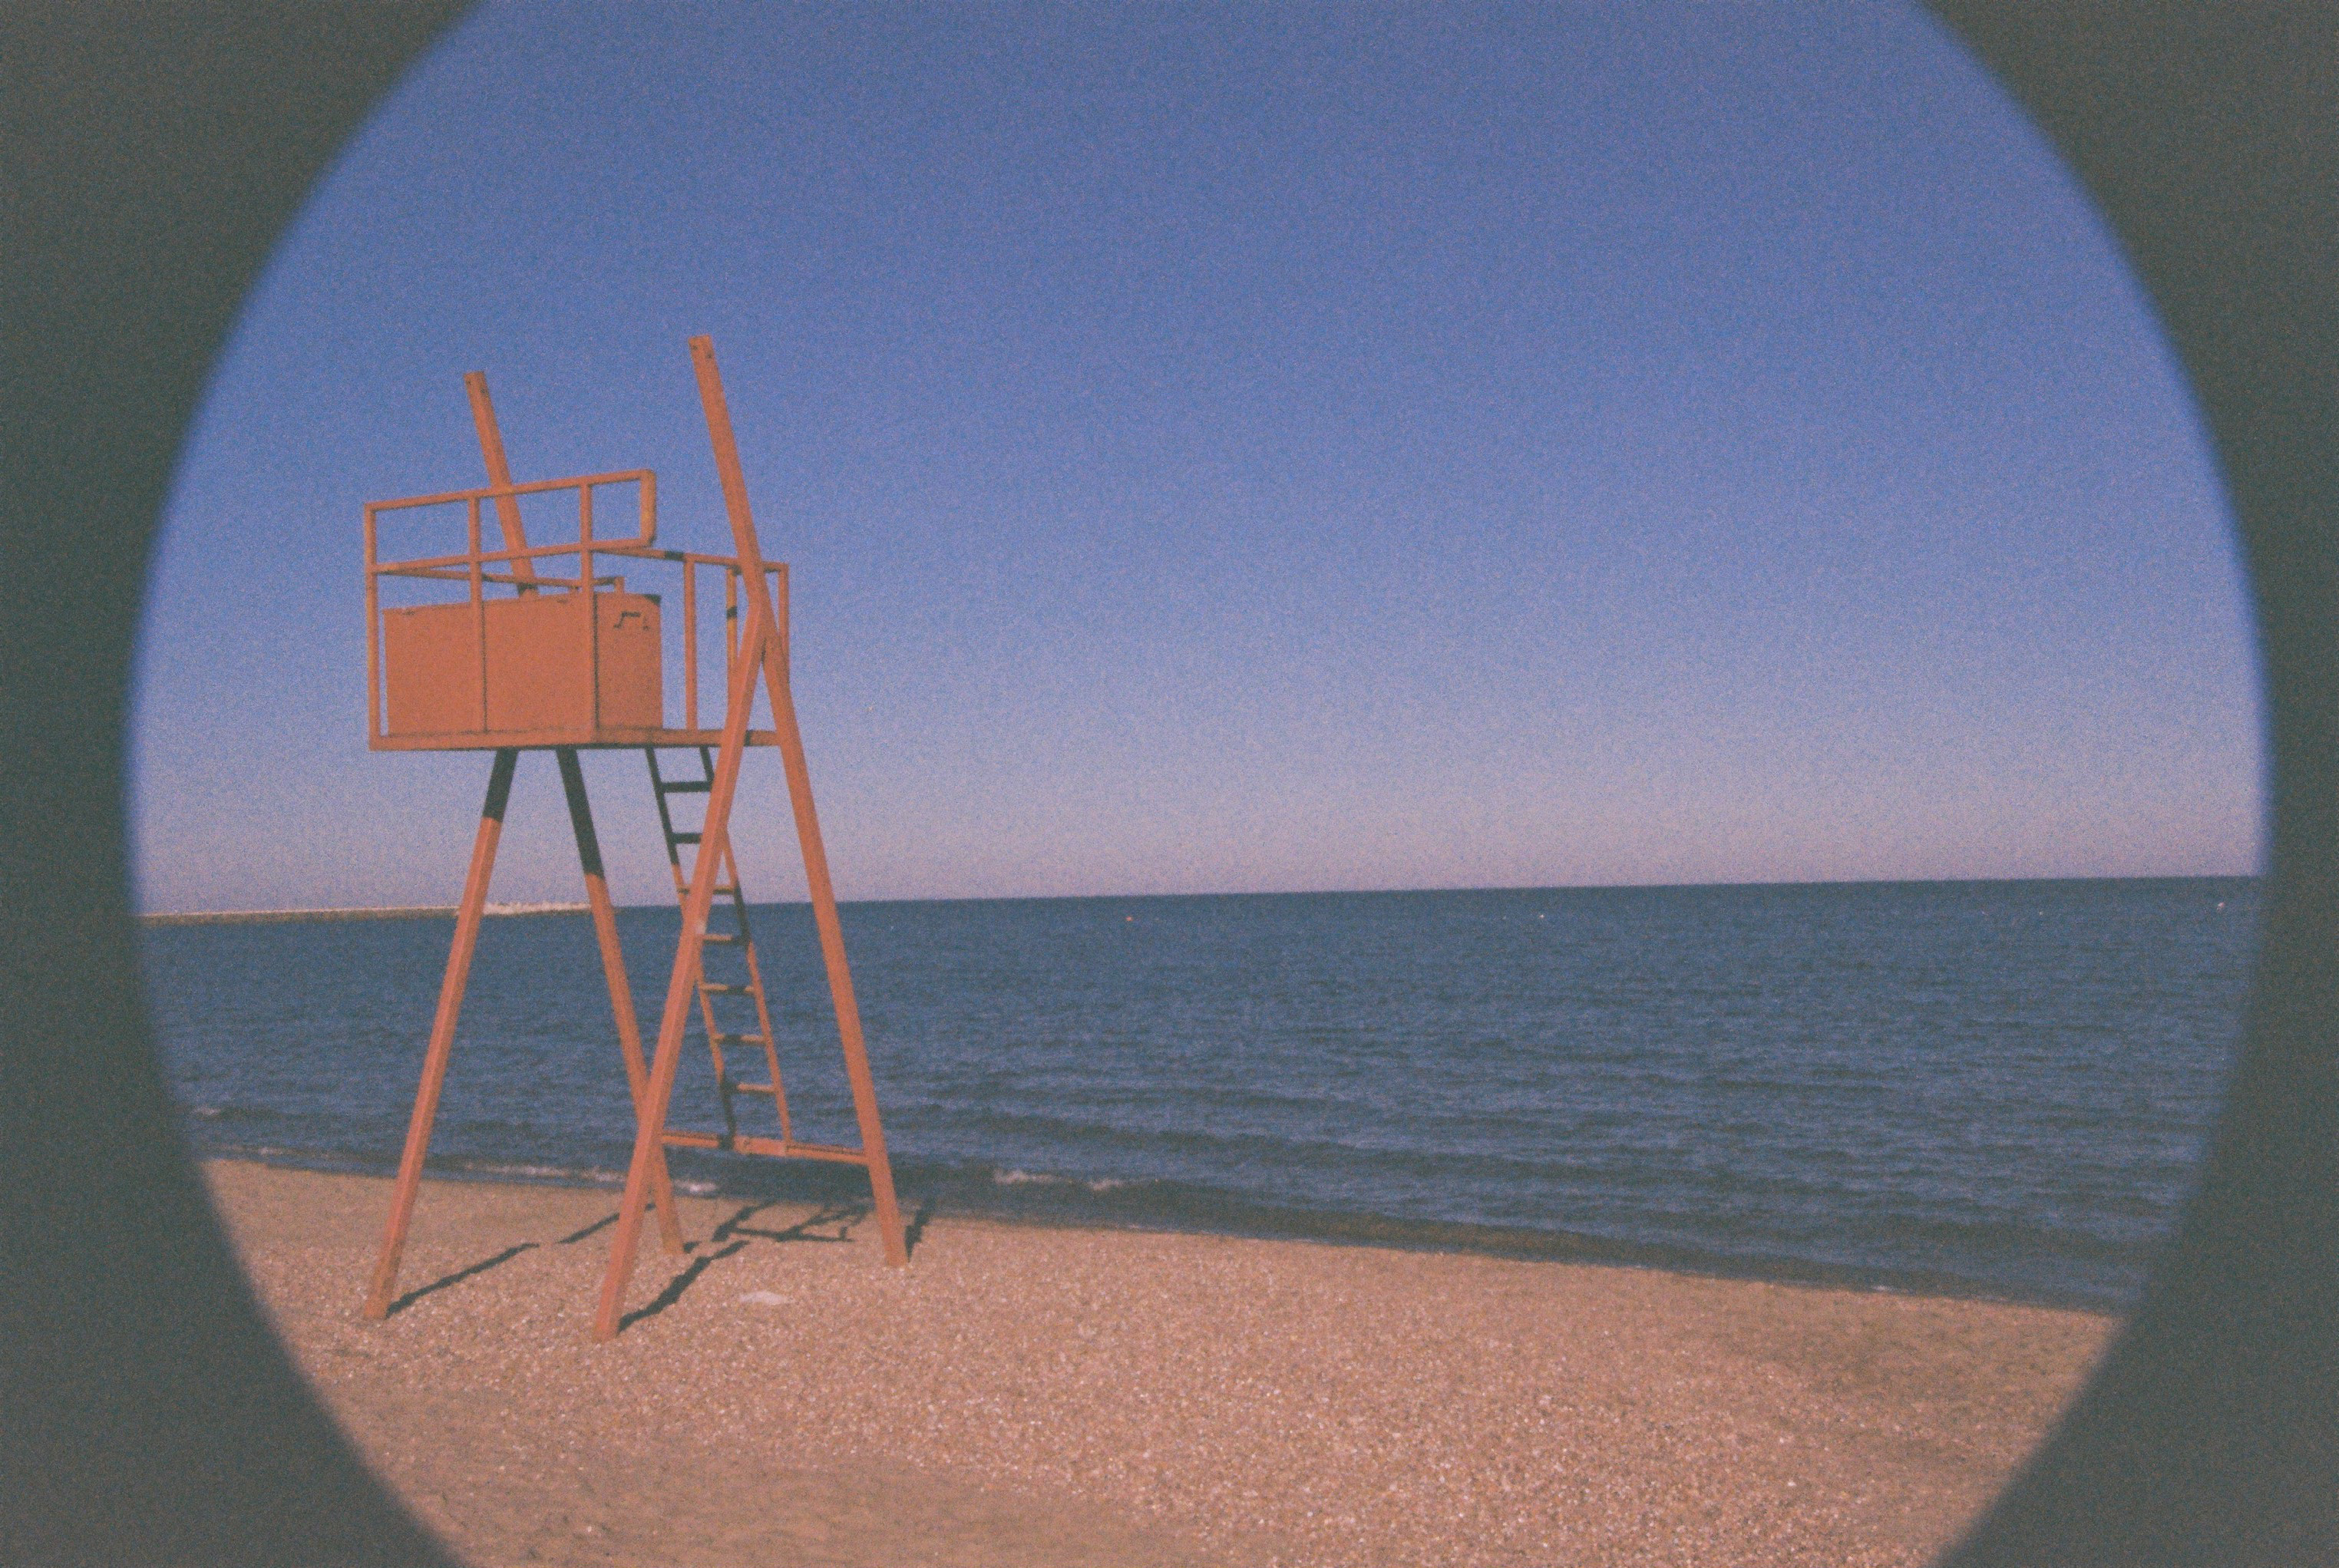 Photo of seaside in Romania, with vignette and prominent grain.